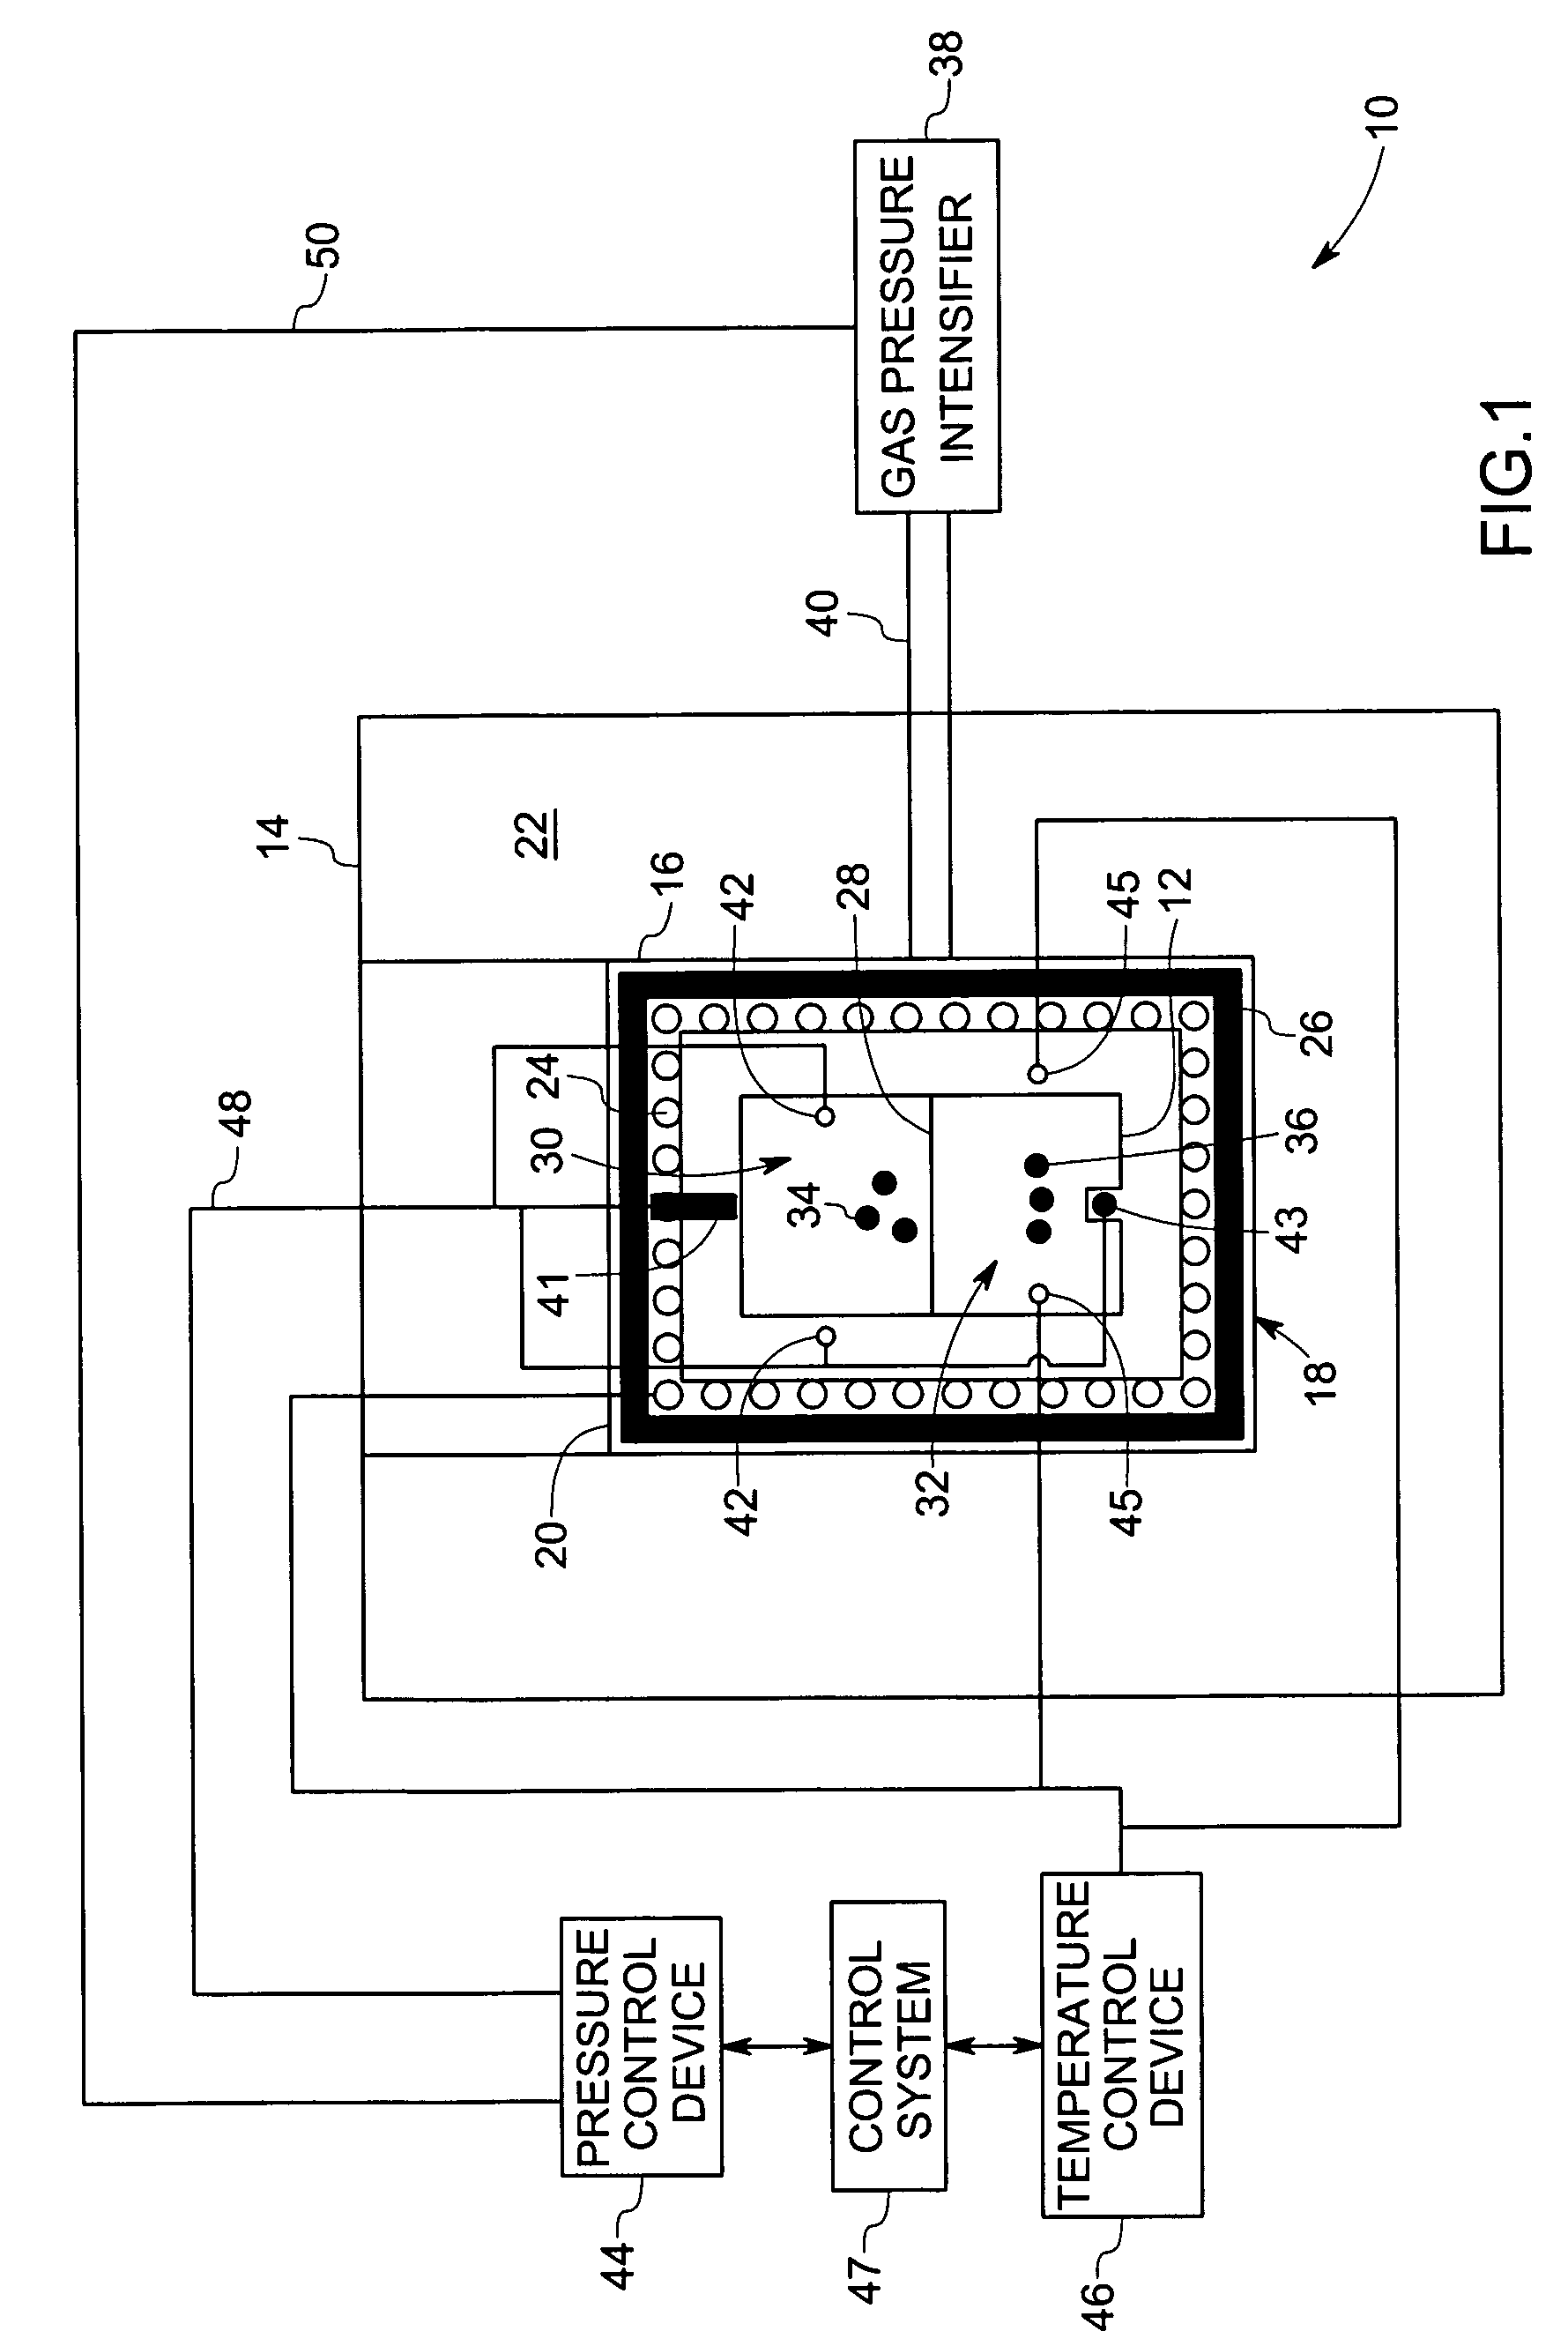 Apparatus for processing materials in supercritical fluids and methods thereof